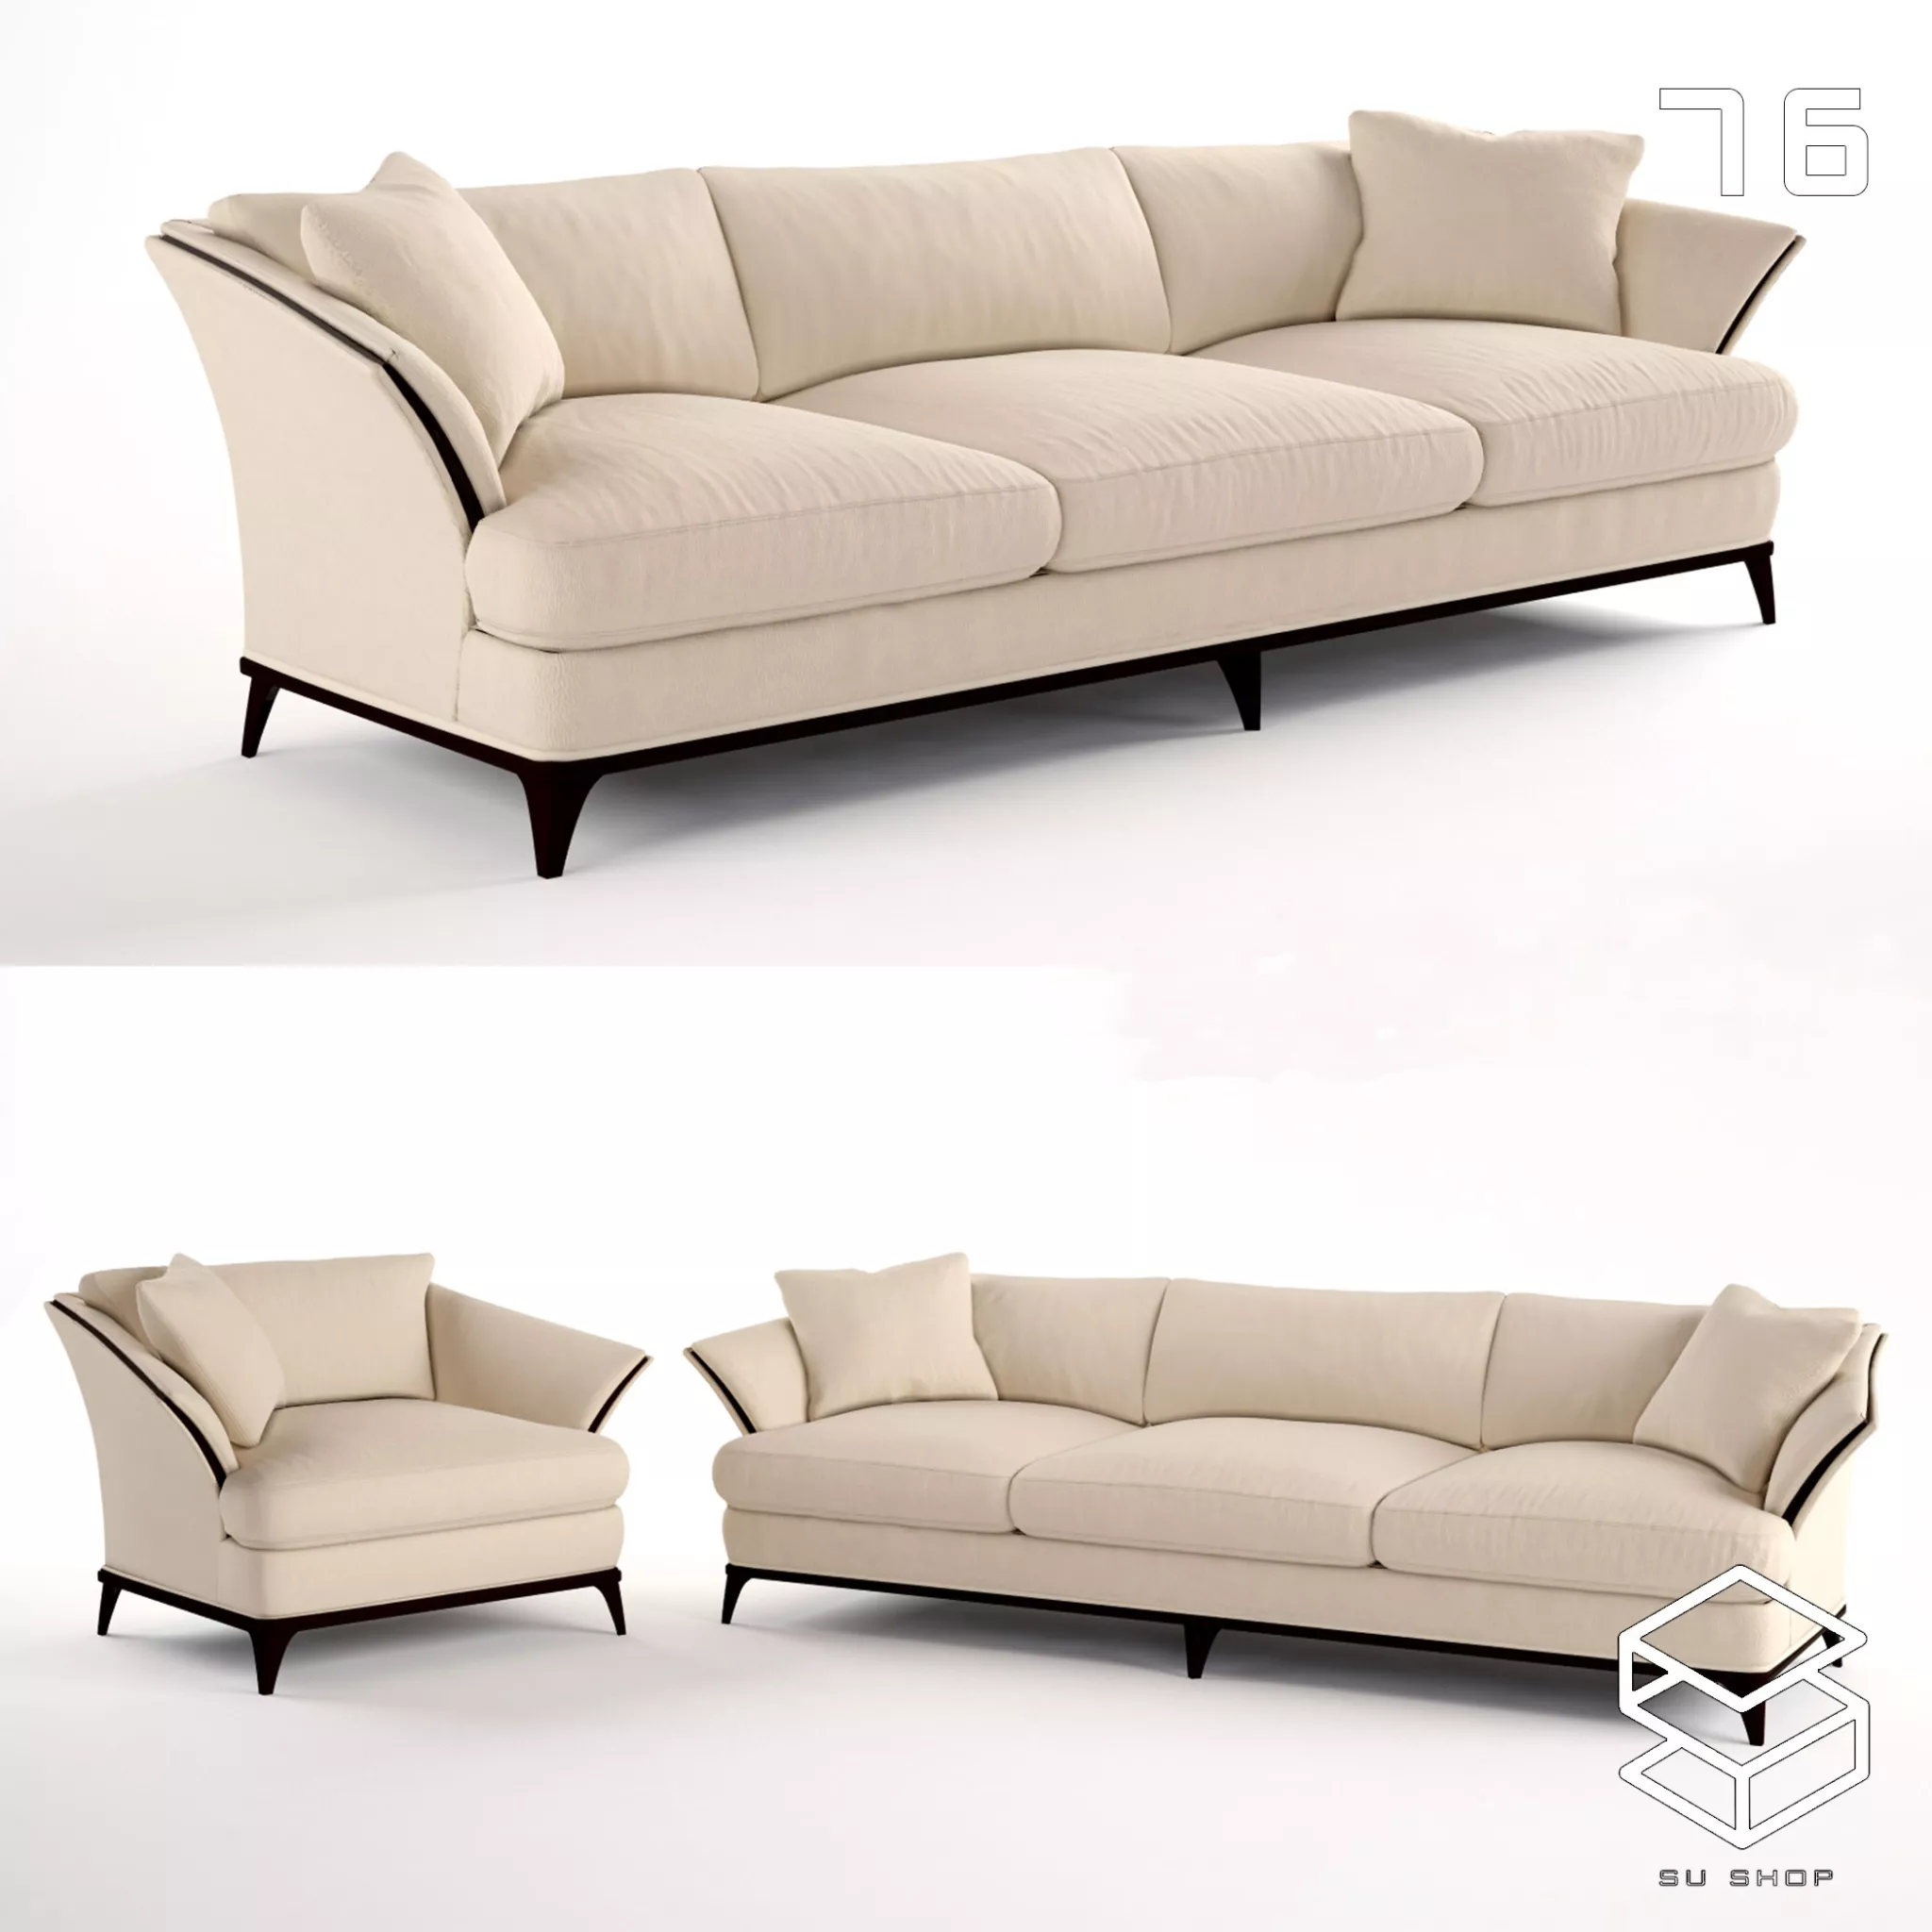 MODERN SOFA - SKETCHUP 3D MODEL - VRAY OR ENSCAPE - ID13703